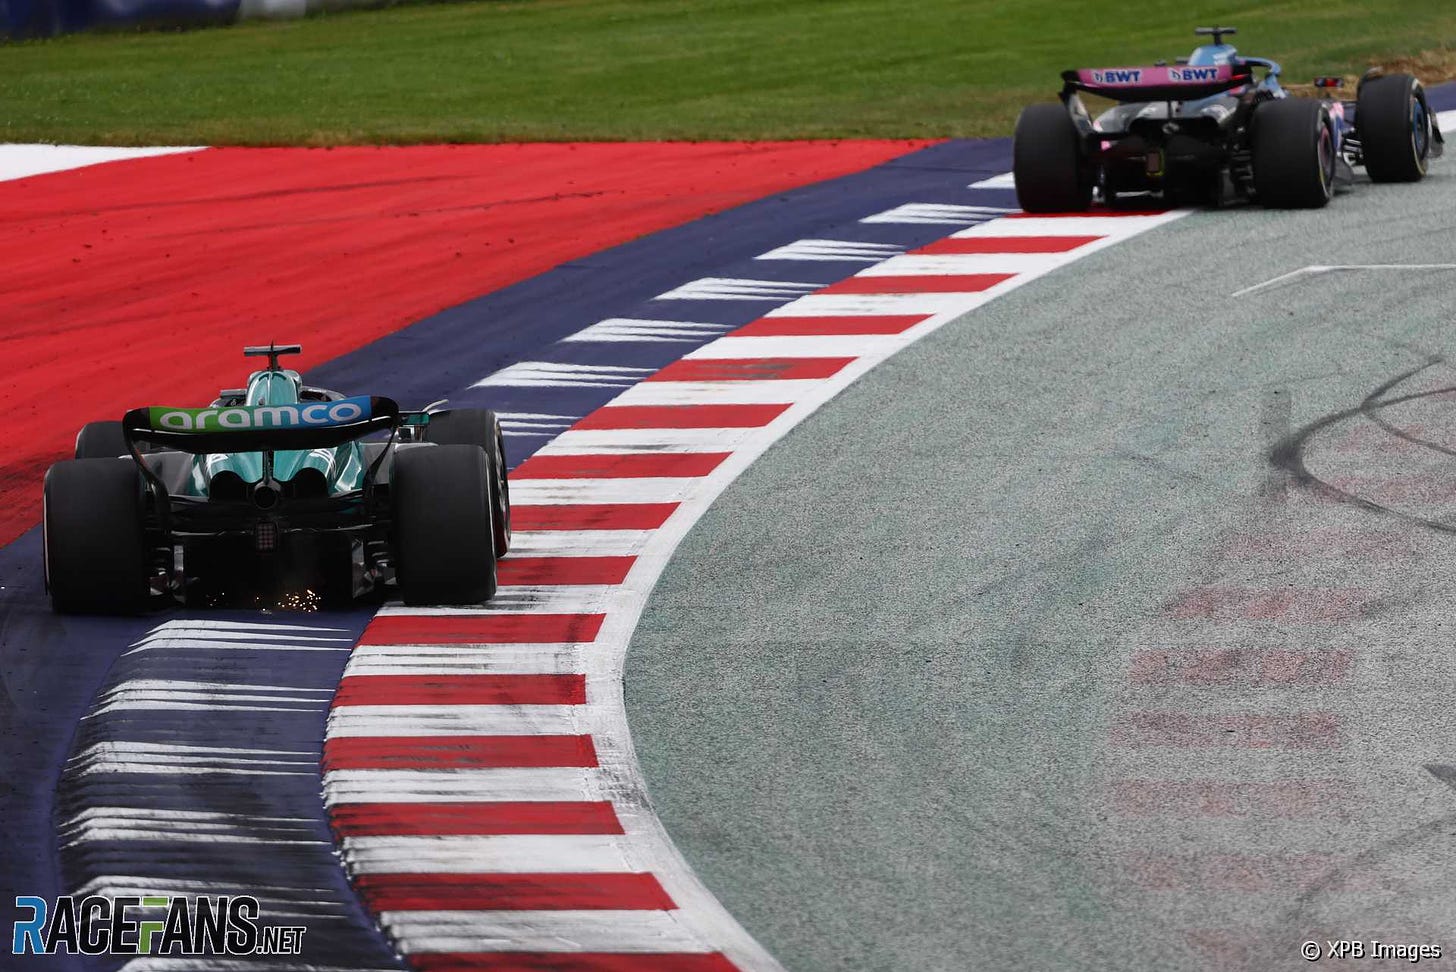 Put the gravel back, FIA tells Red Bull Ring after 20 track limits  penalties in race · RaceFans